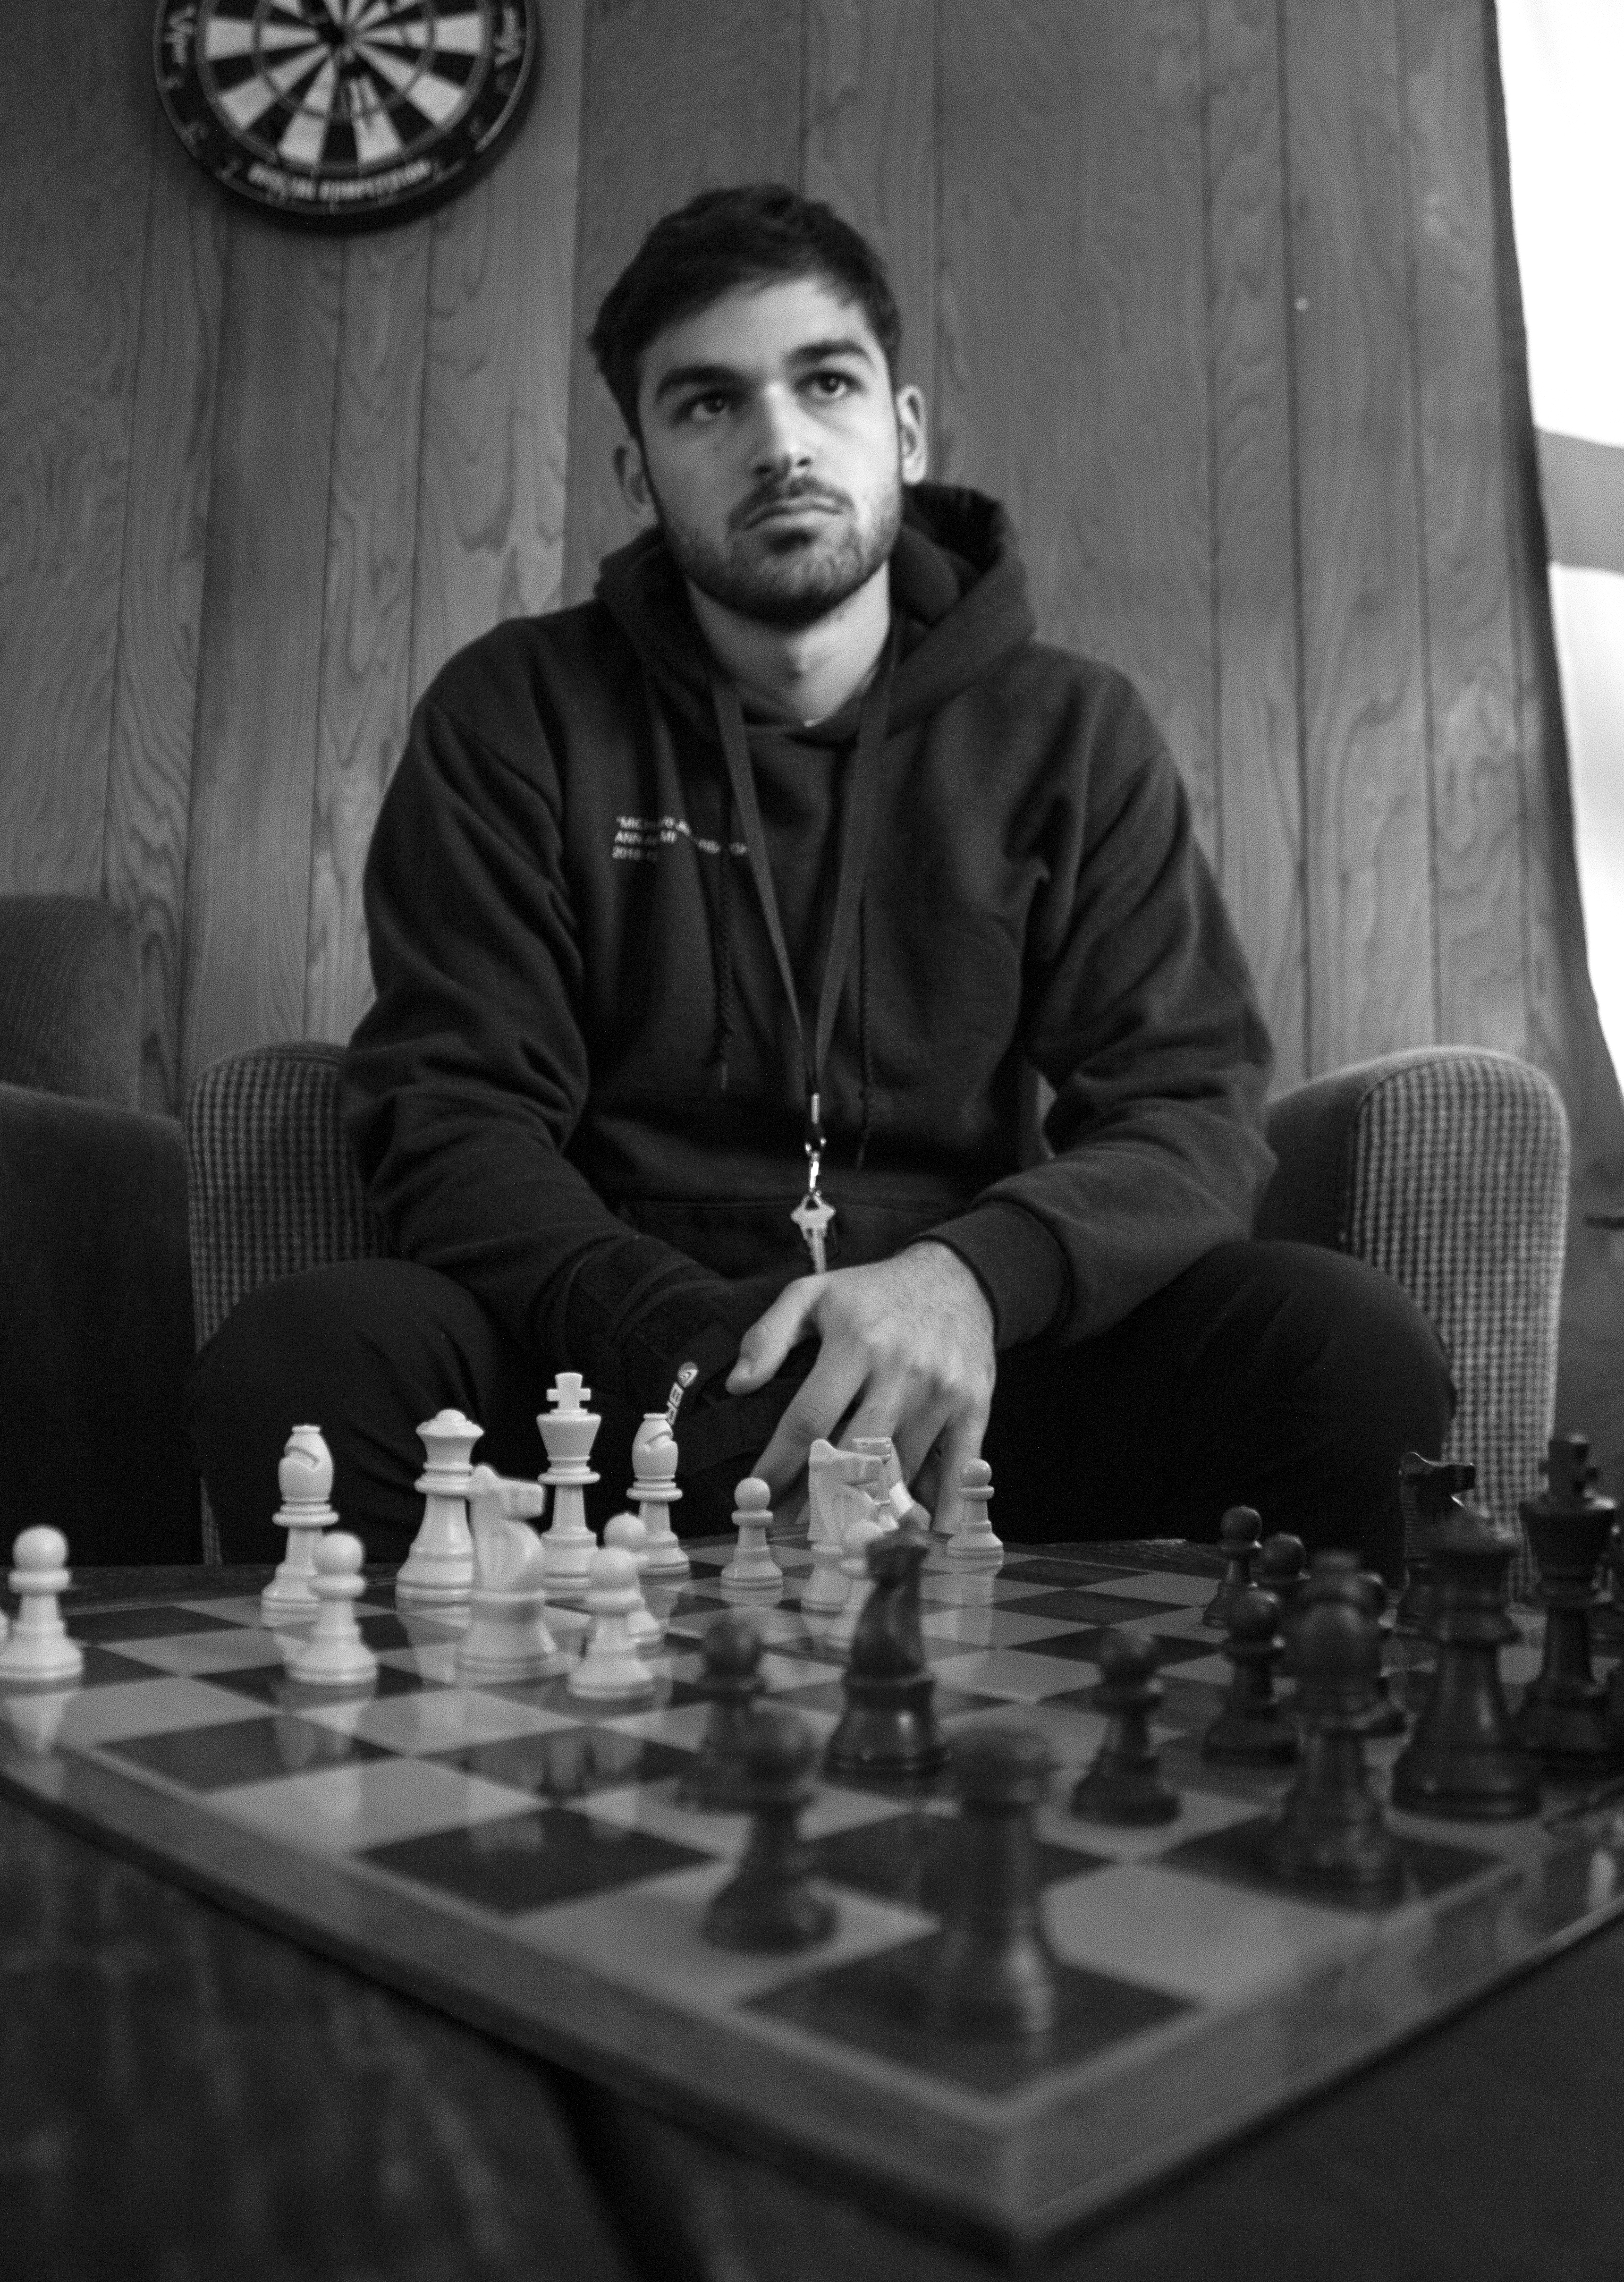 Yousef Kobeissi deciding the next move in a chess game.